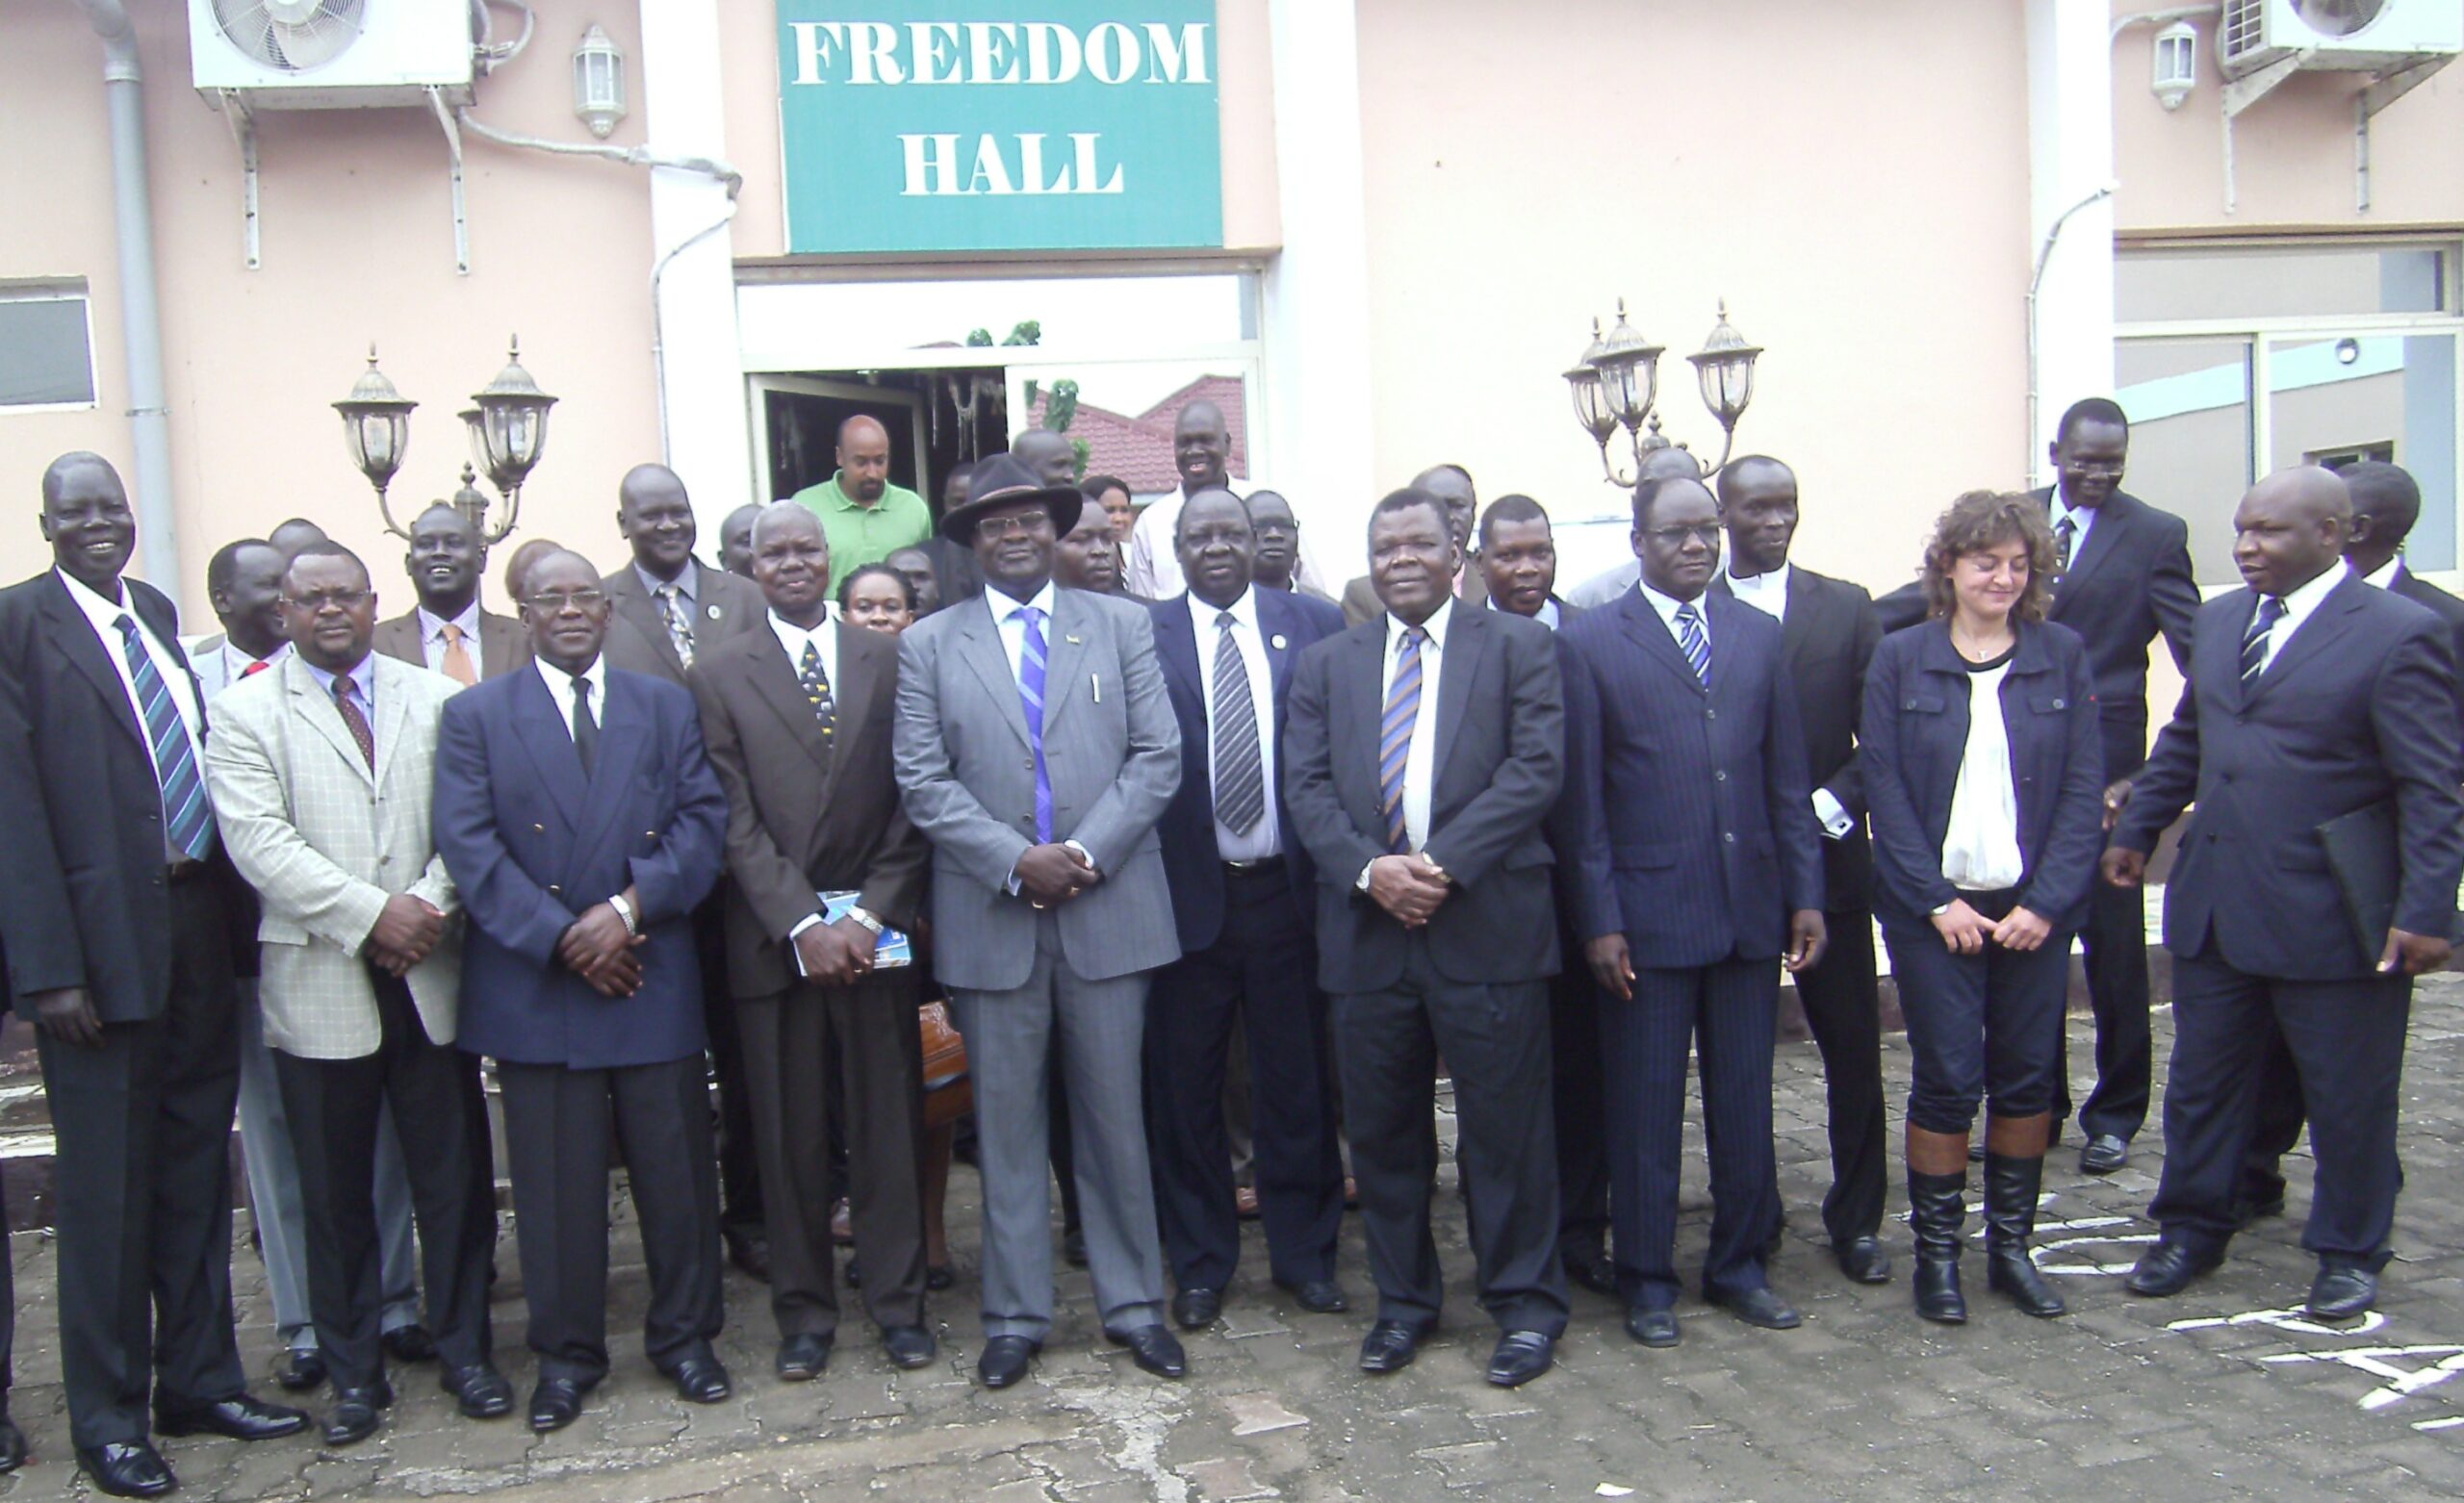 Participants of the South Sudan national conference on judicial independence, Juba, 5 September 2012 (ST)